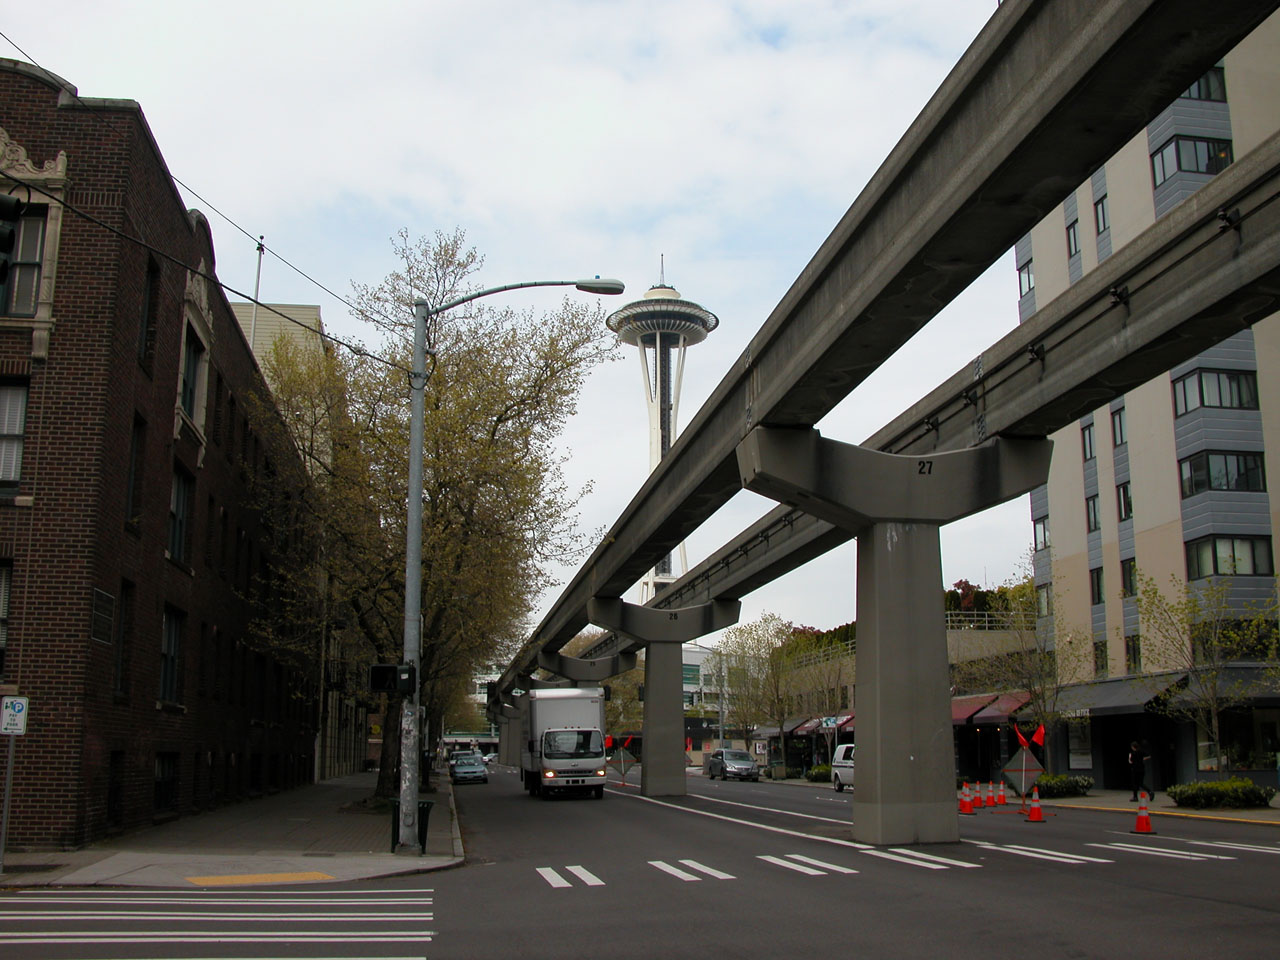 Space Needle with Monorail